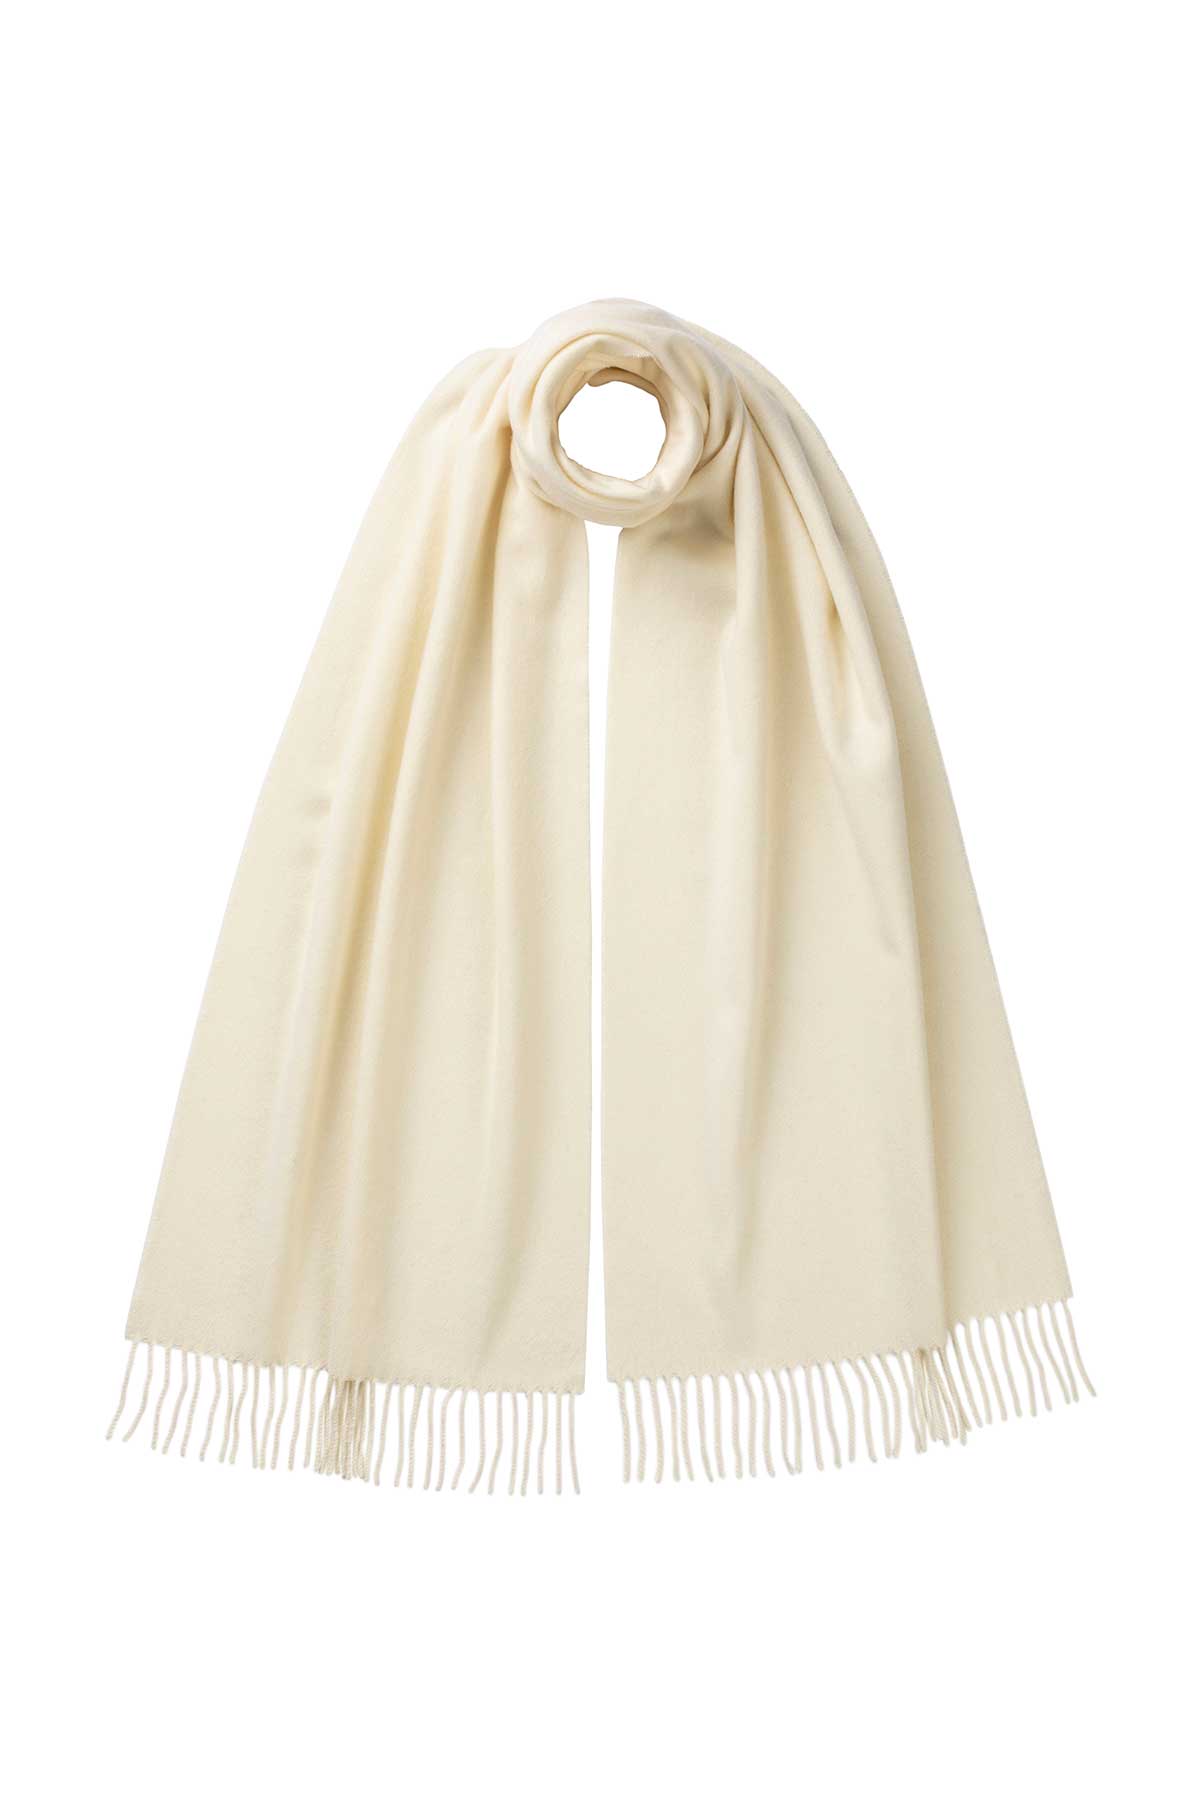 Johnstons of Elgin Ultrafine Merino Wool Scarf in White on a white background WDC01797SA0000ONE